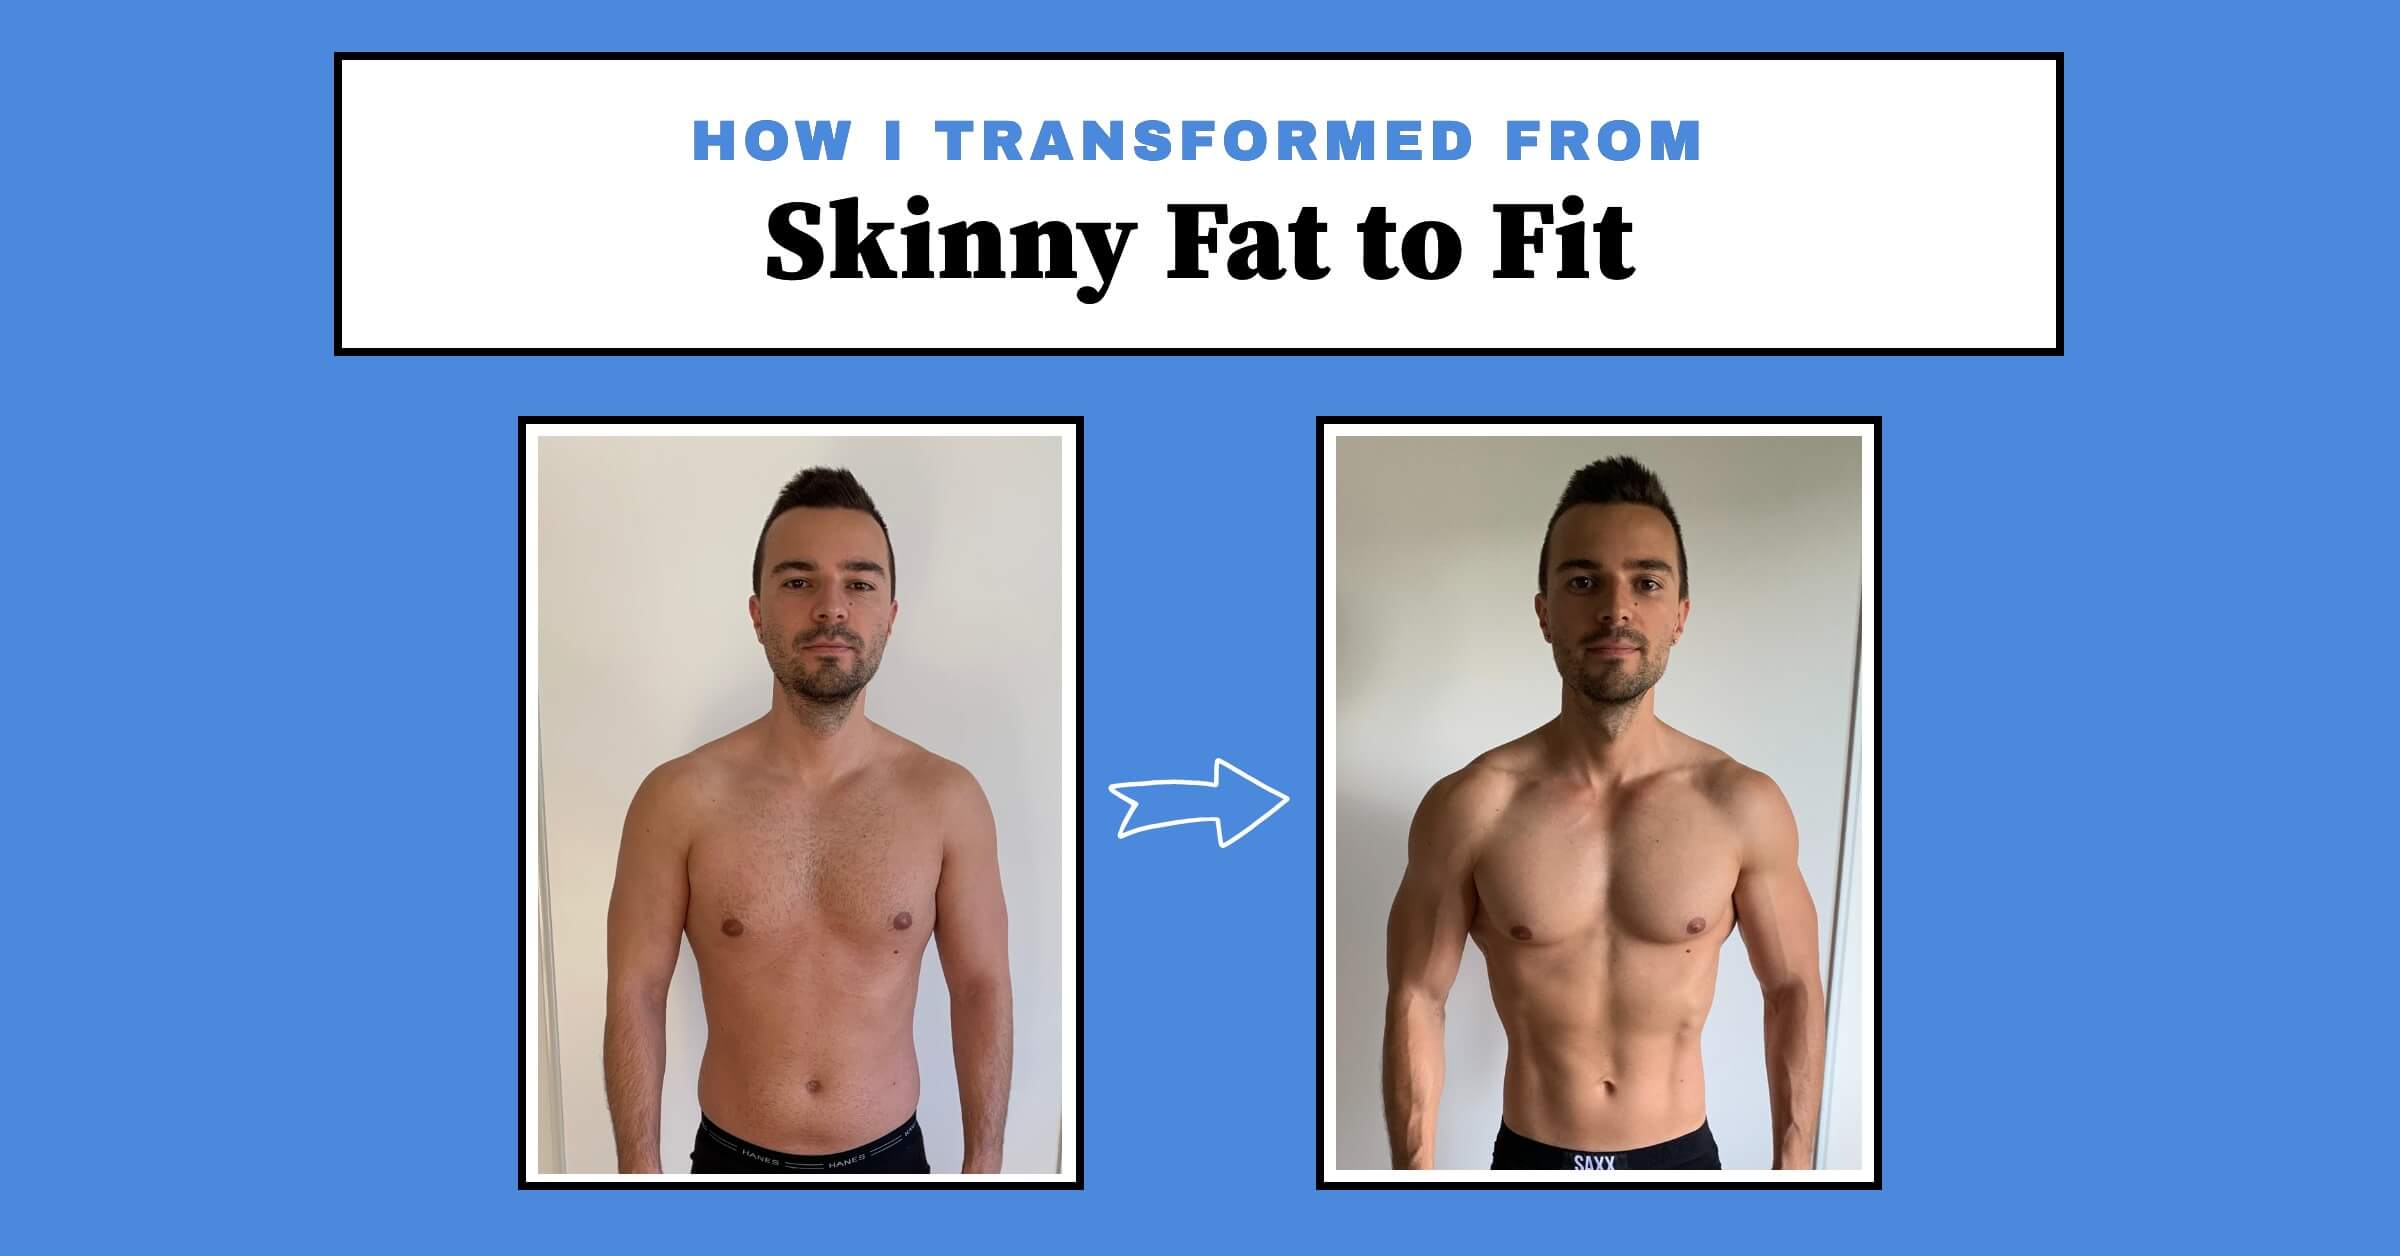 This Guy Went from Skinny Fat to Super Fit With a Simple Workout